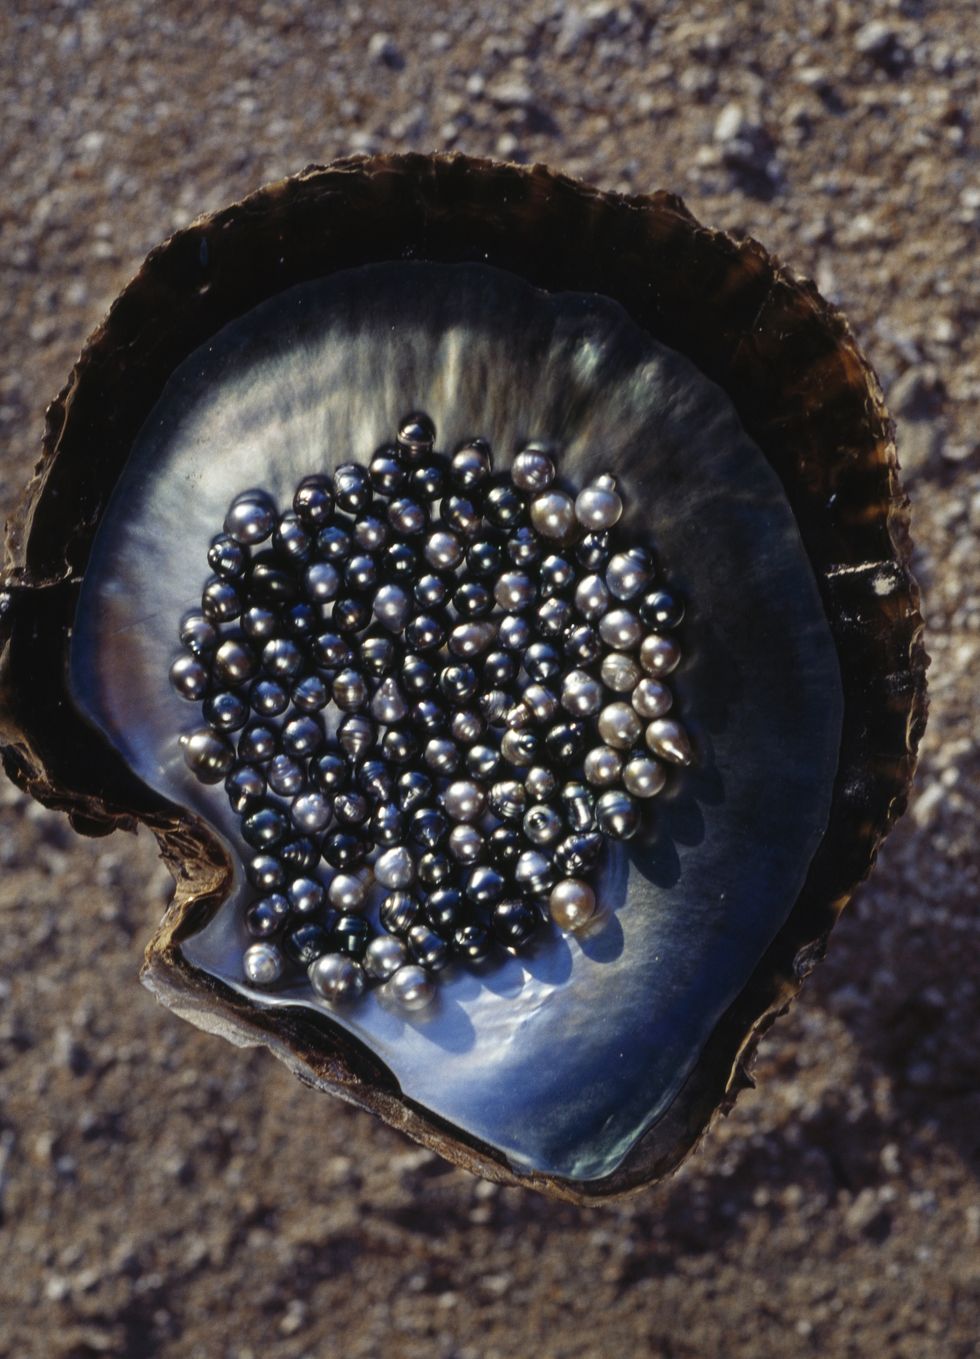 france   october 13 black pearls on the mother of pearl with the oyster shell, manihi, tuamotu archipelago, french polynesia overseas territory of the french republic photo by deagostinigetty images